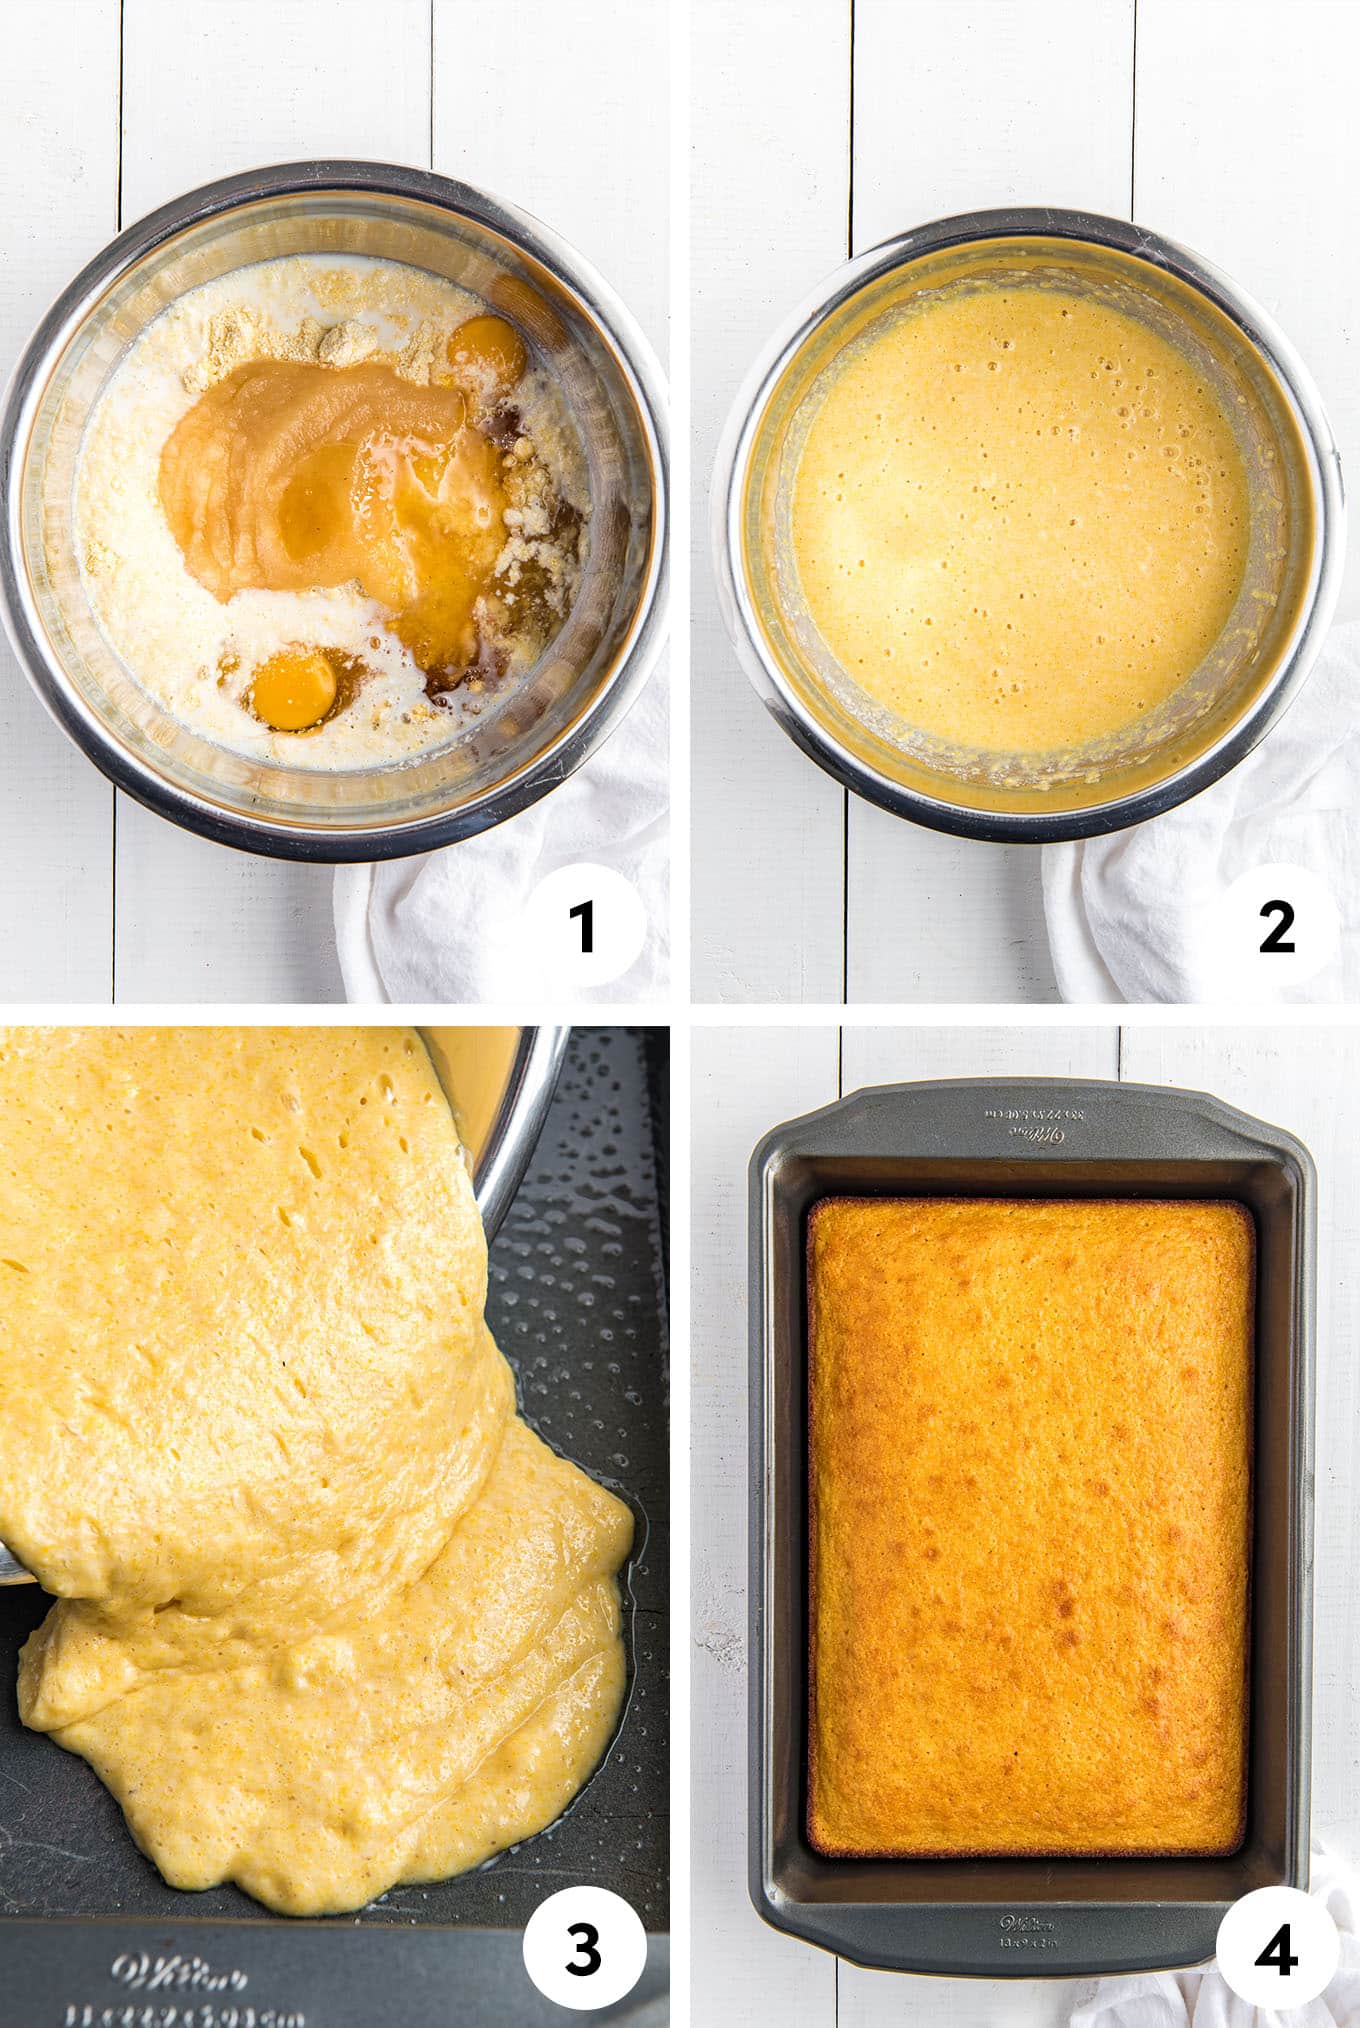 A collage of images showing mixing and baking cornbread with Jiffy corn muffin mix.